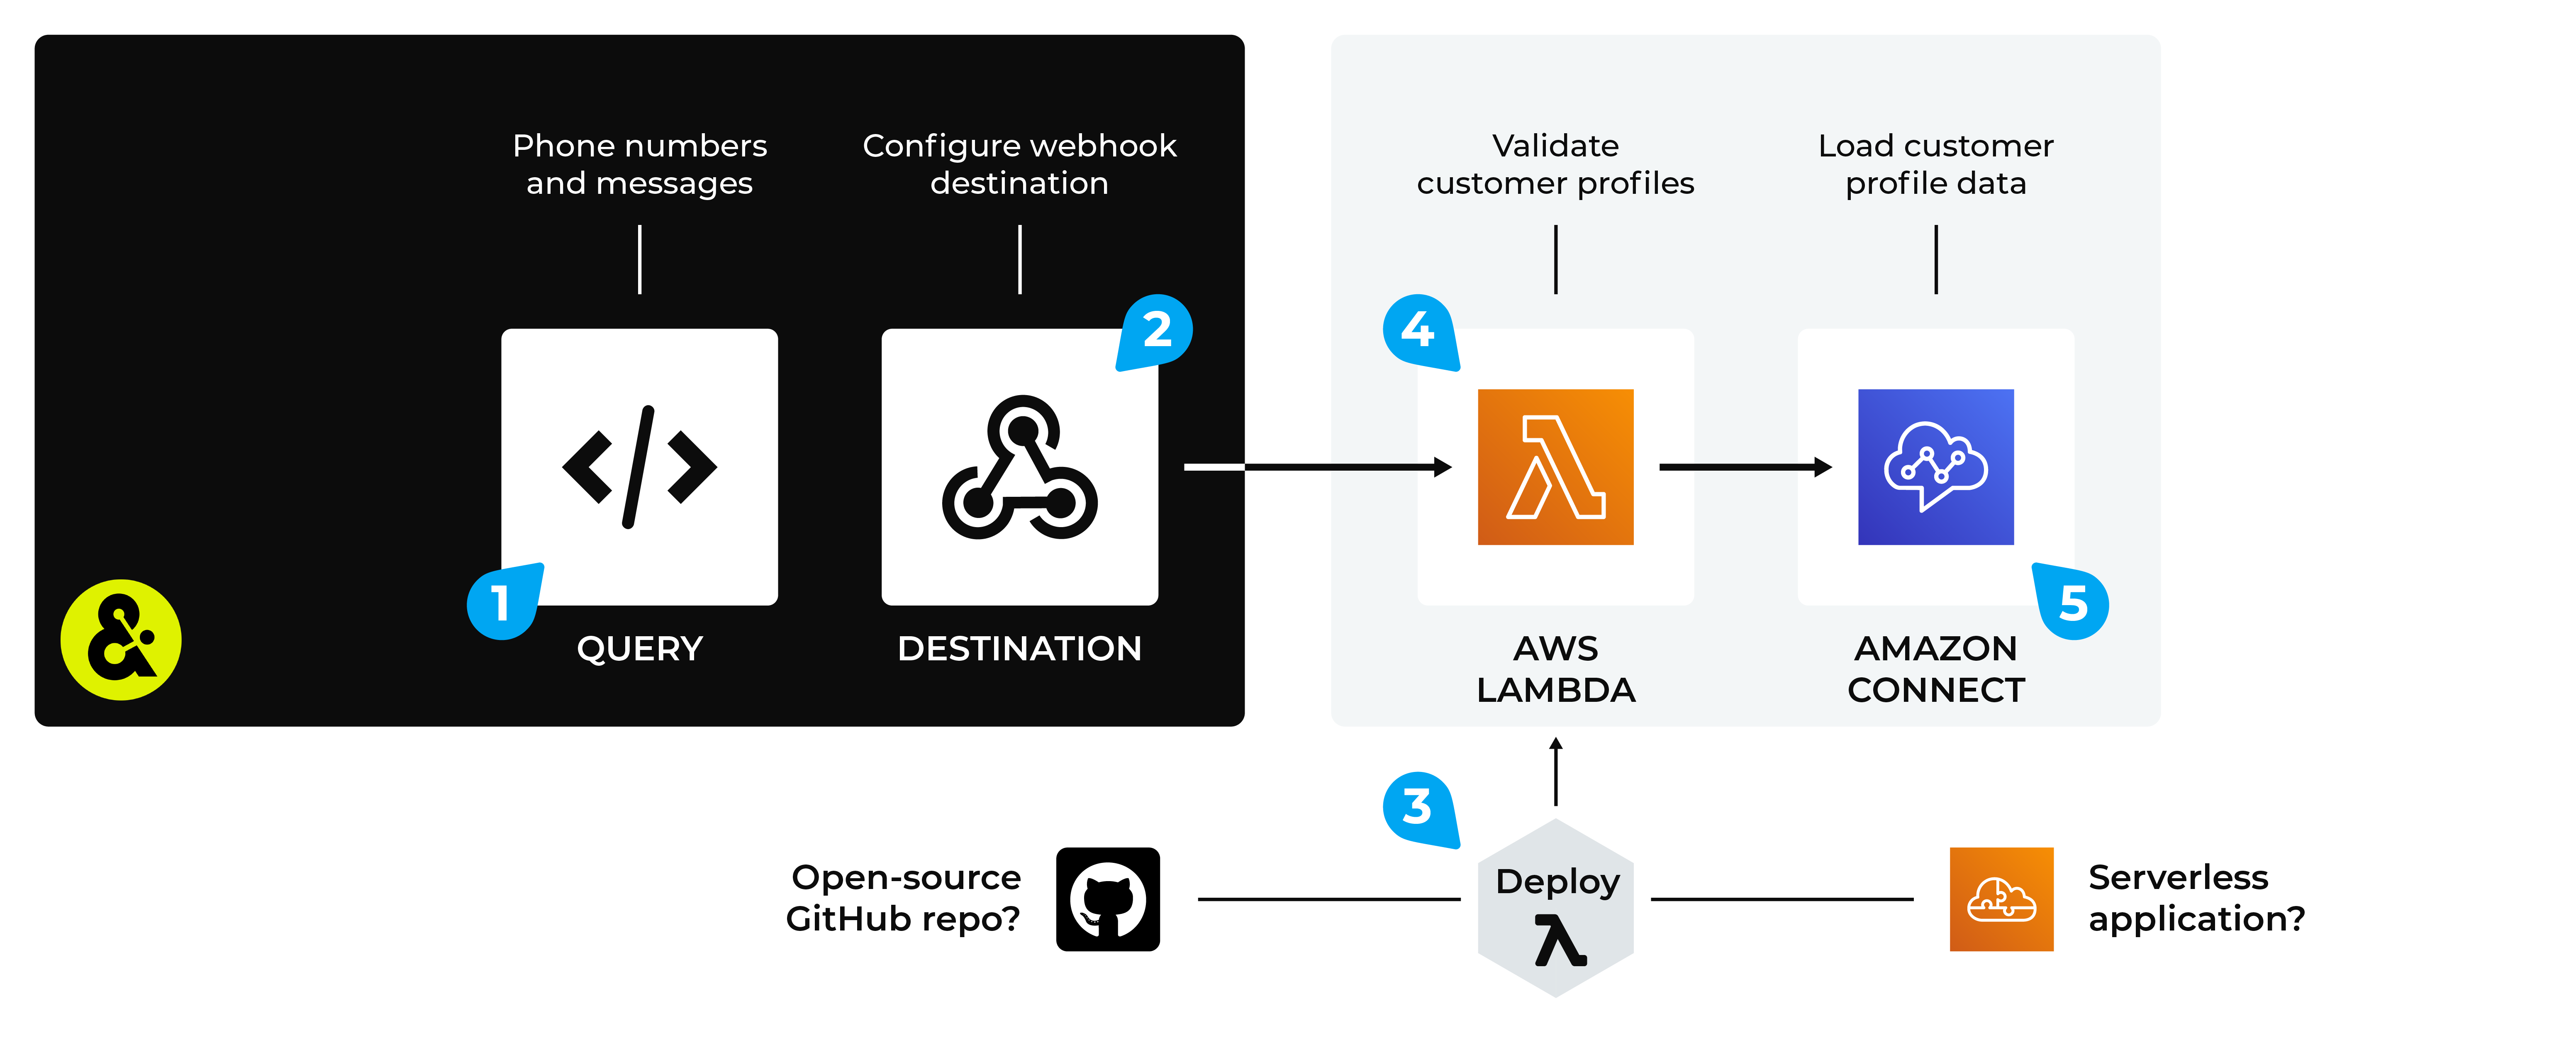 Send customer profiles from Amperity to AWS Connect.